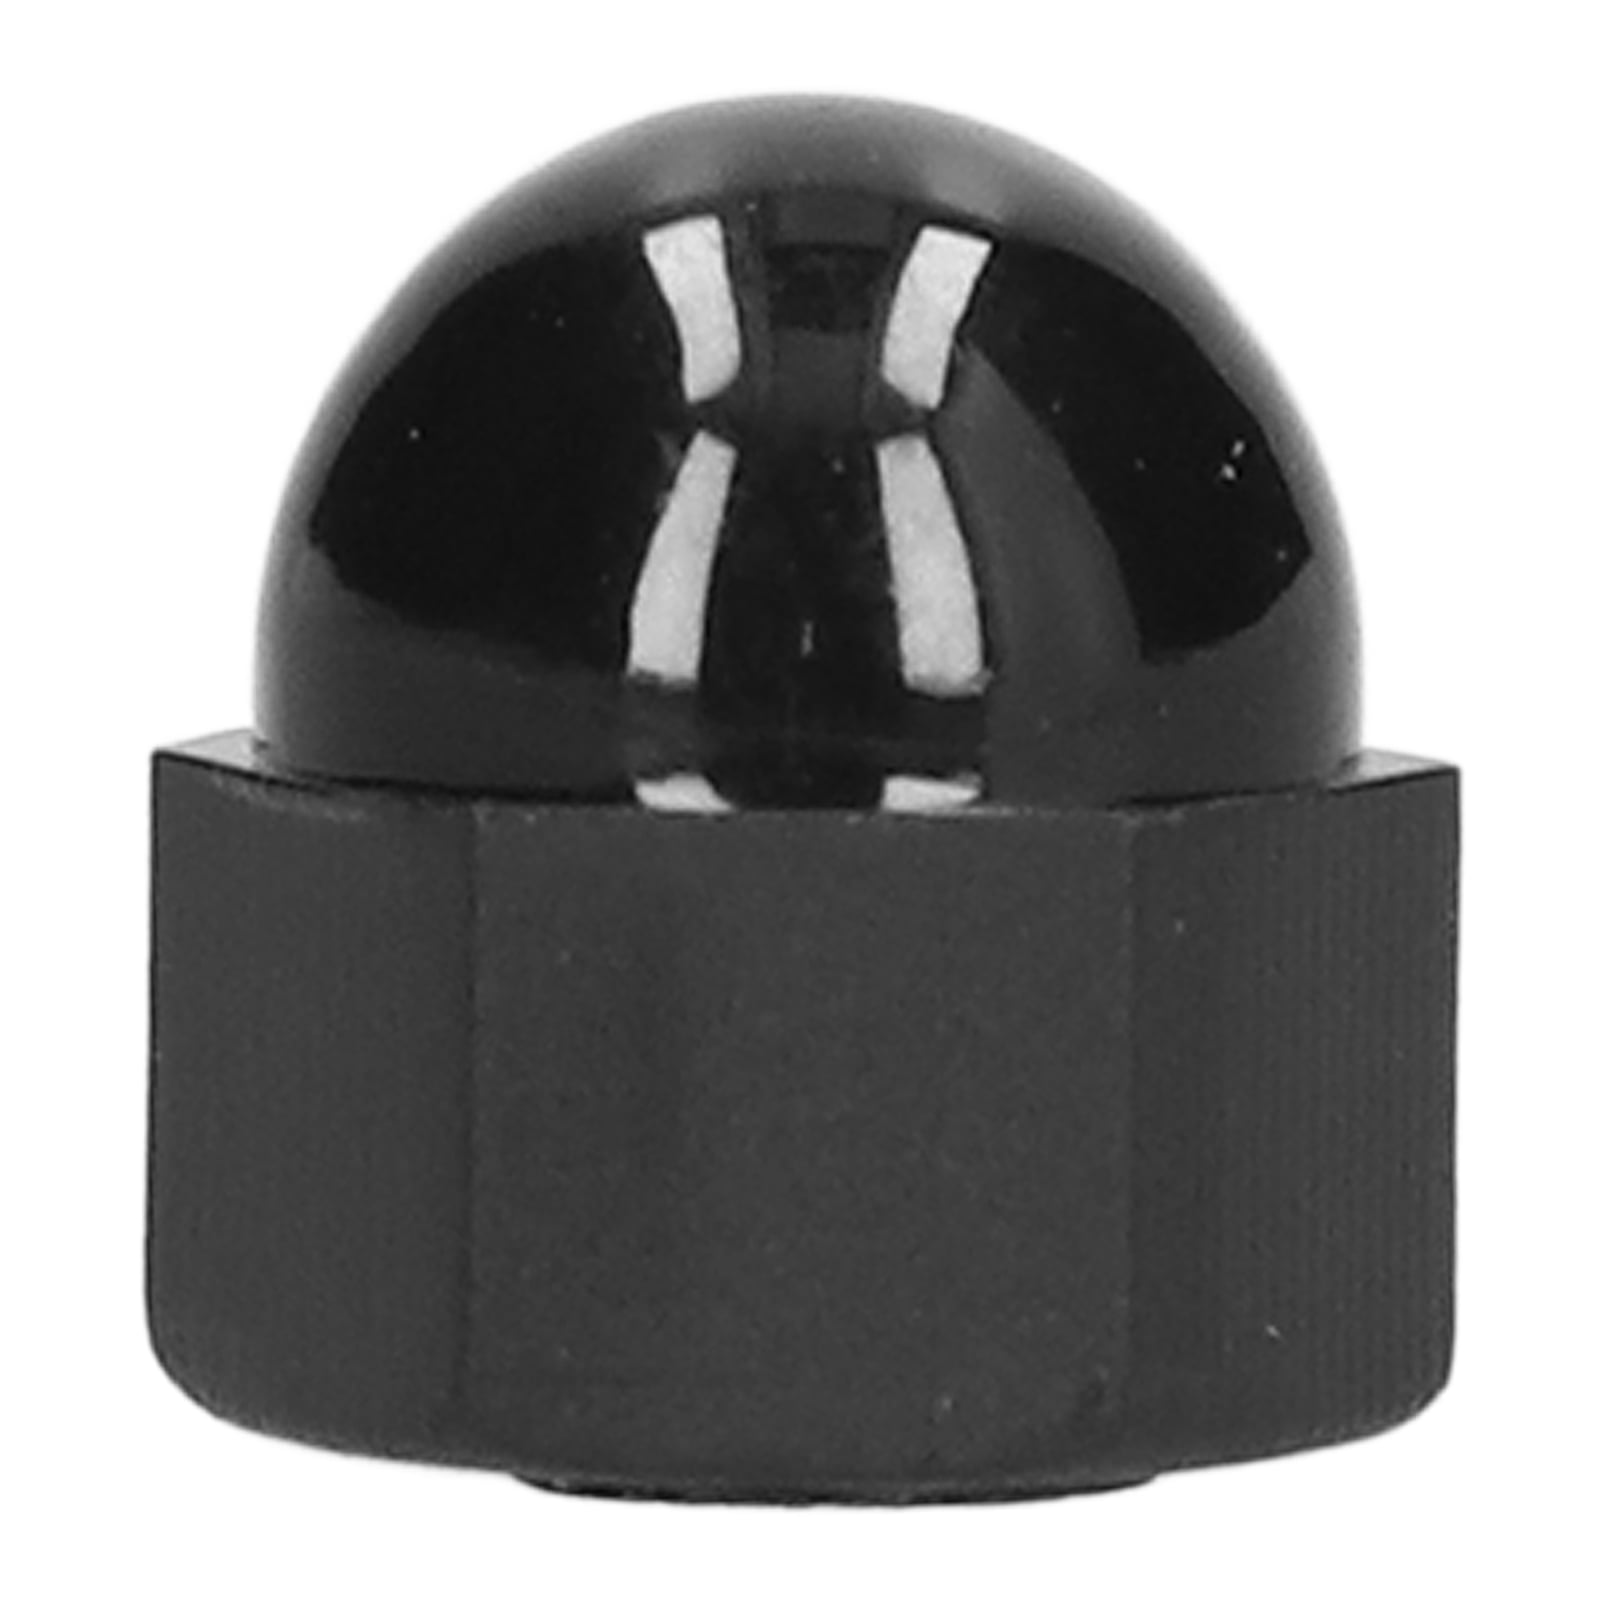 Korrex Protective Caps for 6 Hex Nuts White/Black for m4 to m10 